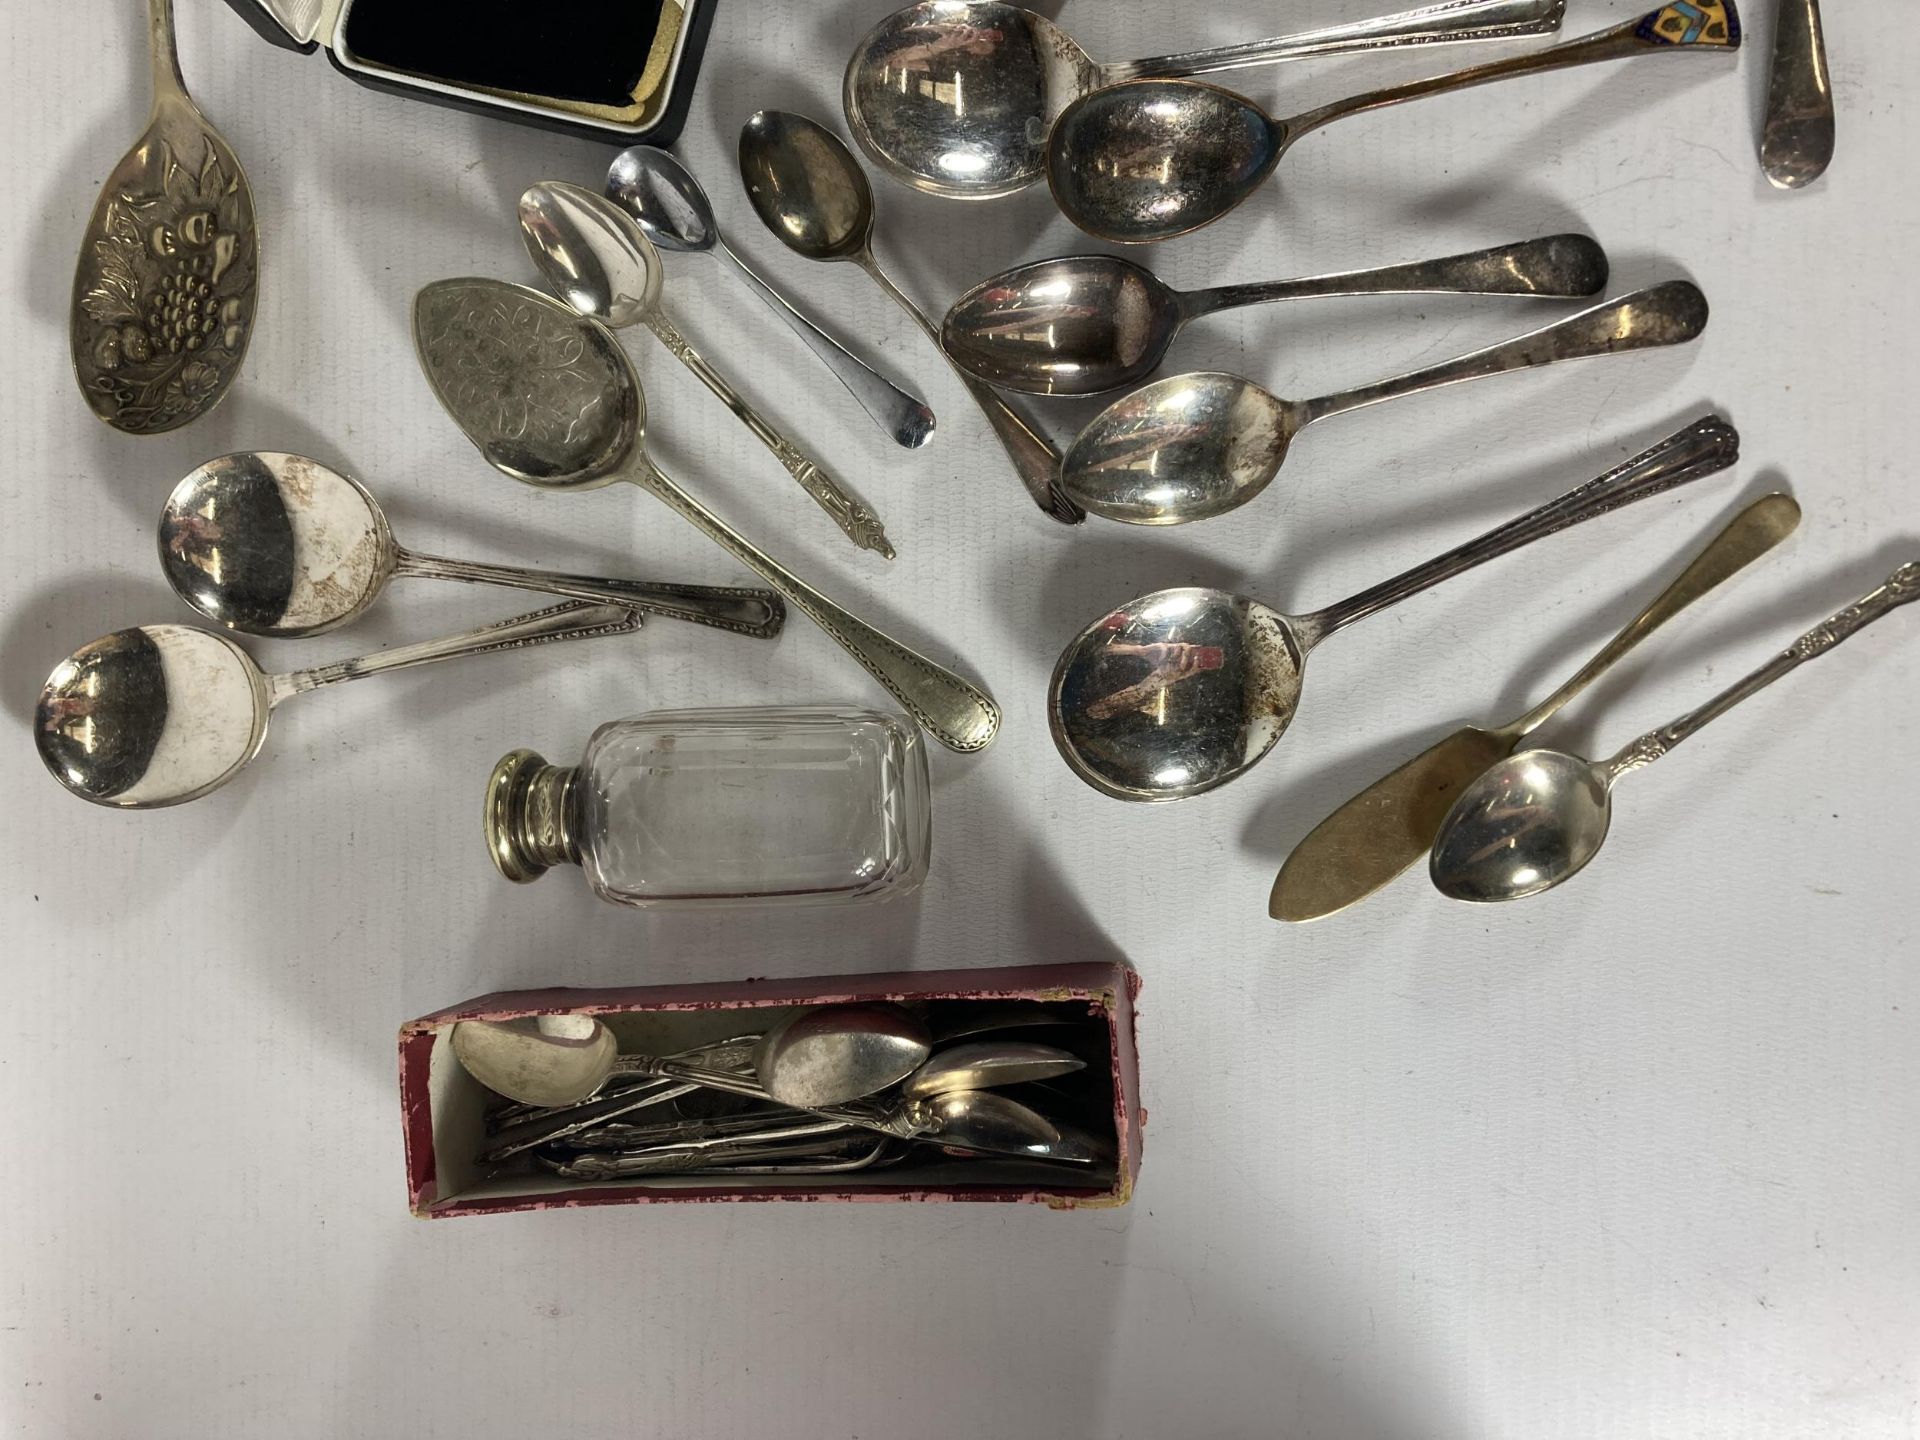 A QUANTITY OF VINTAGE FLATWARE TO INCLUDE LADELS, APOSTLE TEASPOONS, A BERRY SPOON, A WHITE METAL - Image 2 of 4